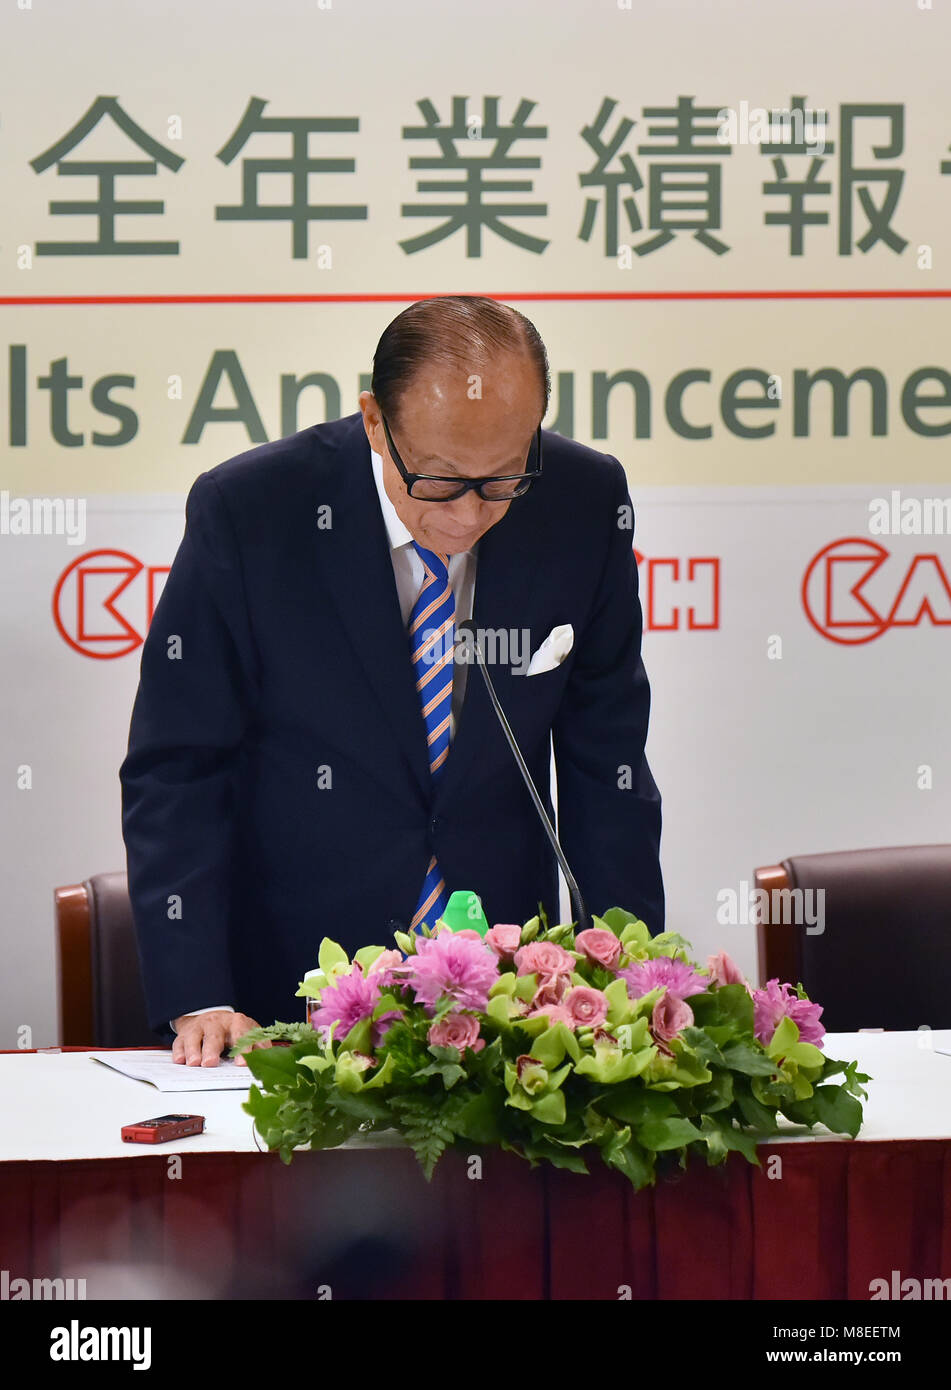 Hong Kong. 16th Mar, 2018. Hong Kong tycoon Li Ka-shing attends a press conference in south China's Hong Kong, March 16, 2018. Li Ka-shing said on Friday that he is retiring from his business empire. Li said he would officially step down as the chairman of CK Hutchison Holdings Ltd. and CK Asset holdings Ltd. at the annual general meeting of the company on May 10 and would serve as a senior adviser. He will be succeeded by his elder son Victor Li Tzar Kuoi. Credit: Wang Xi/Xinhua/Alamy Live News Stock Photo